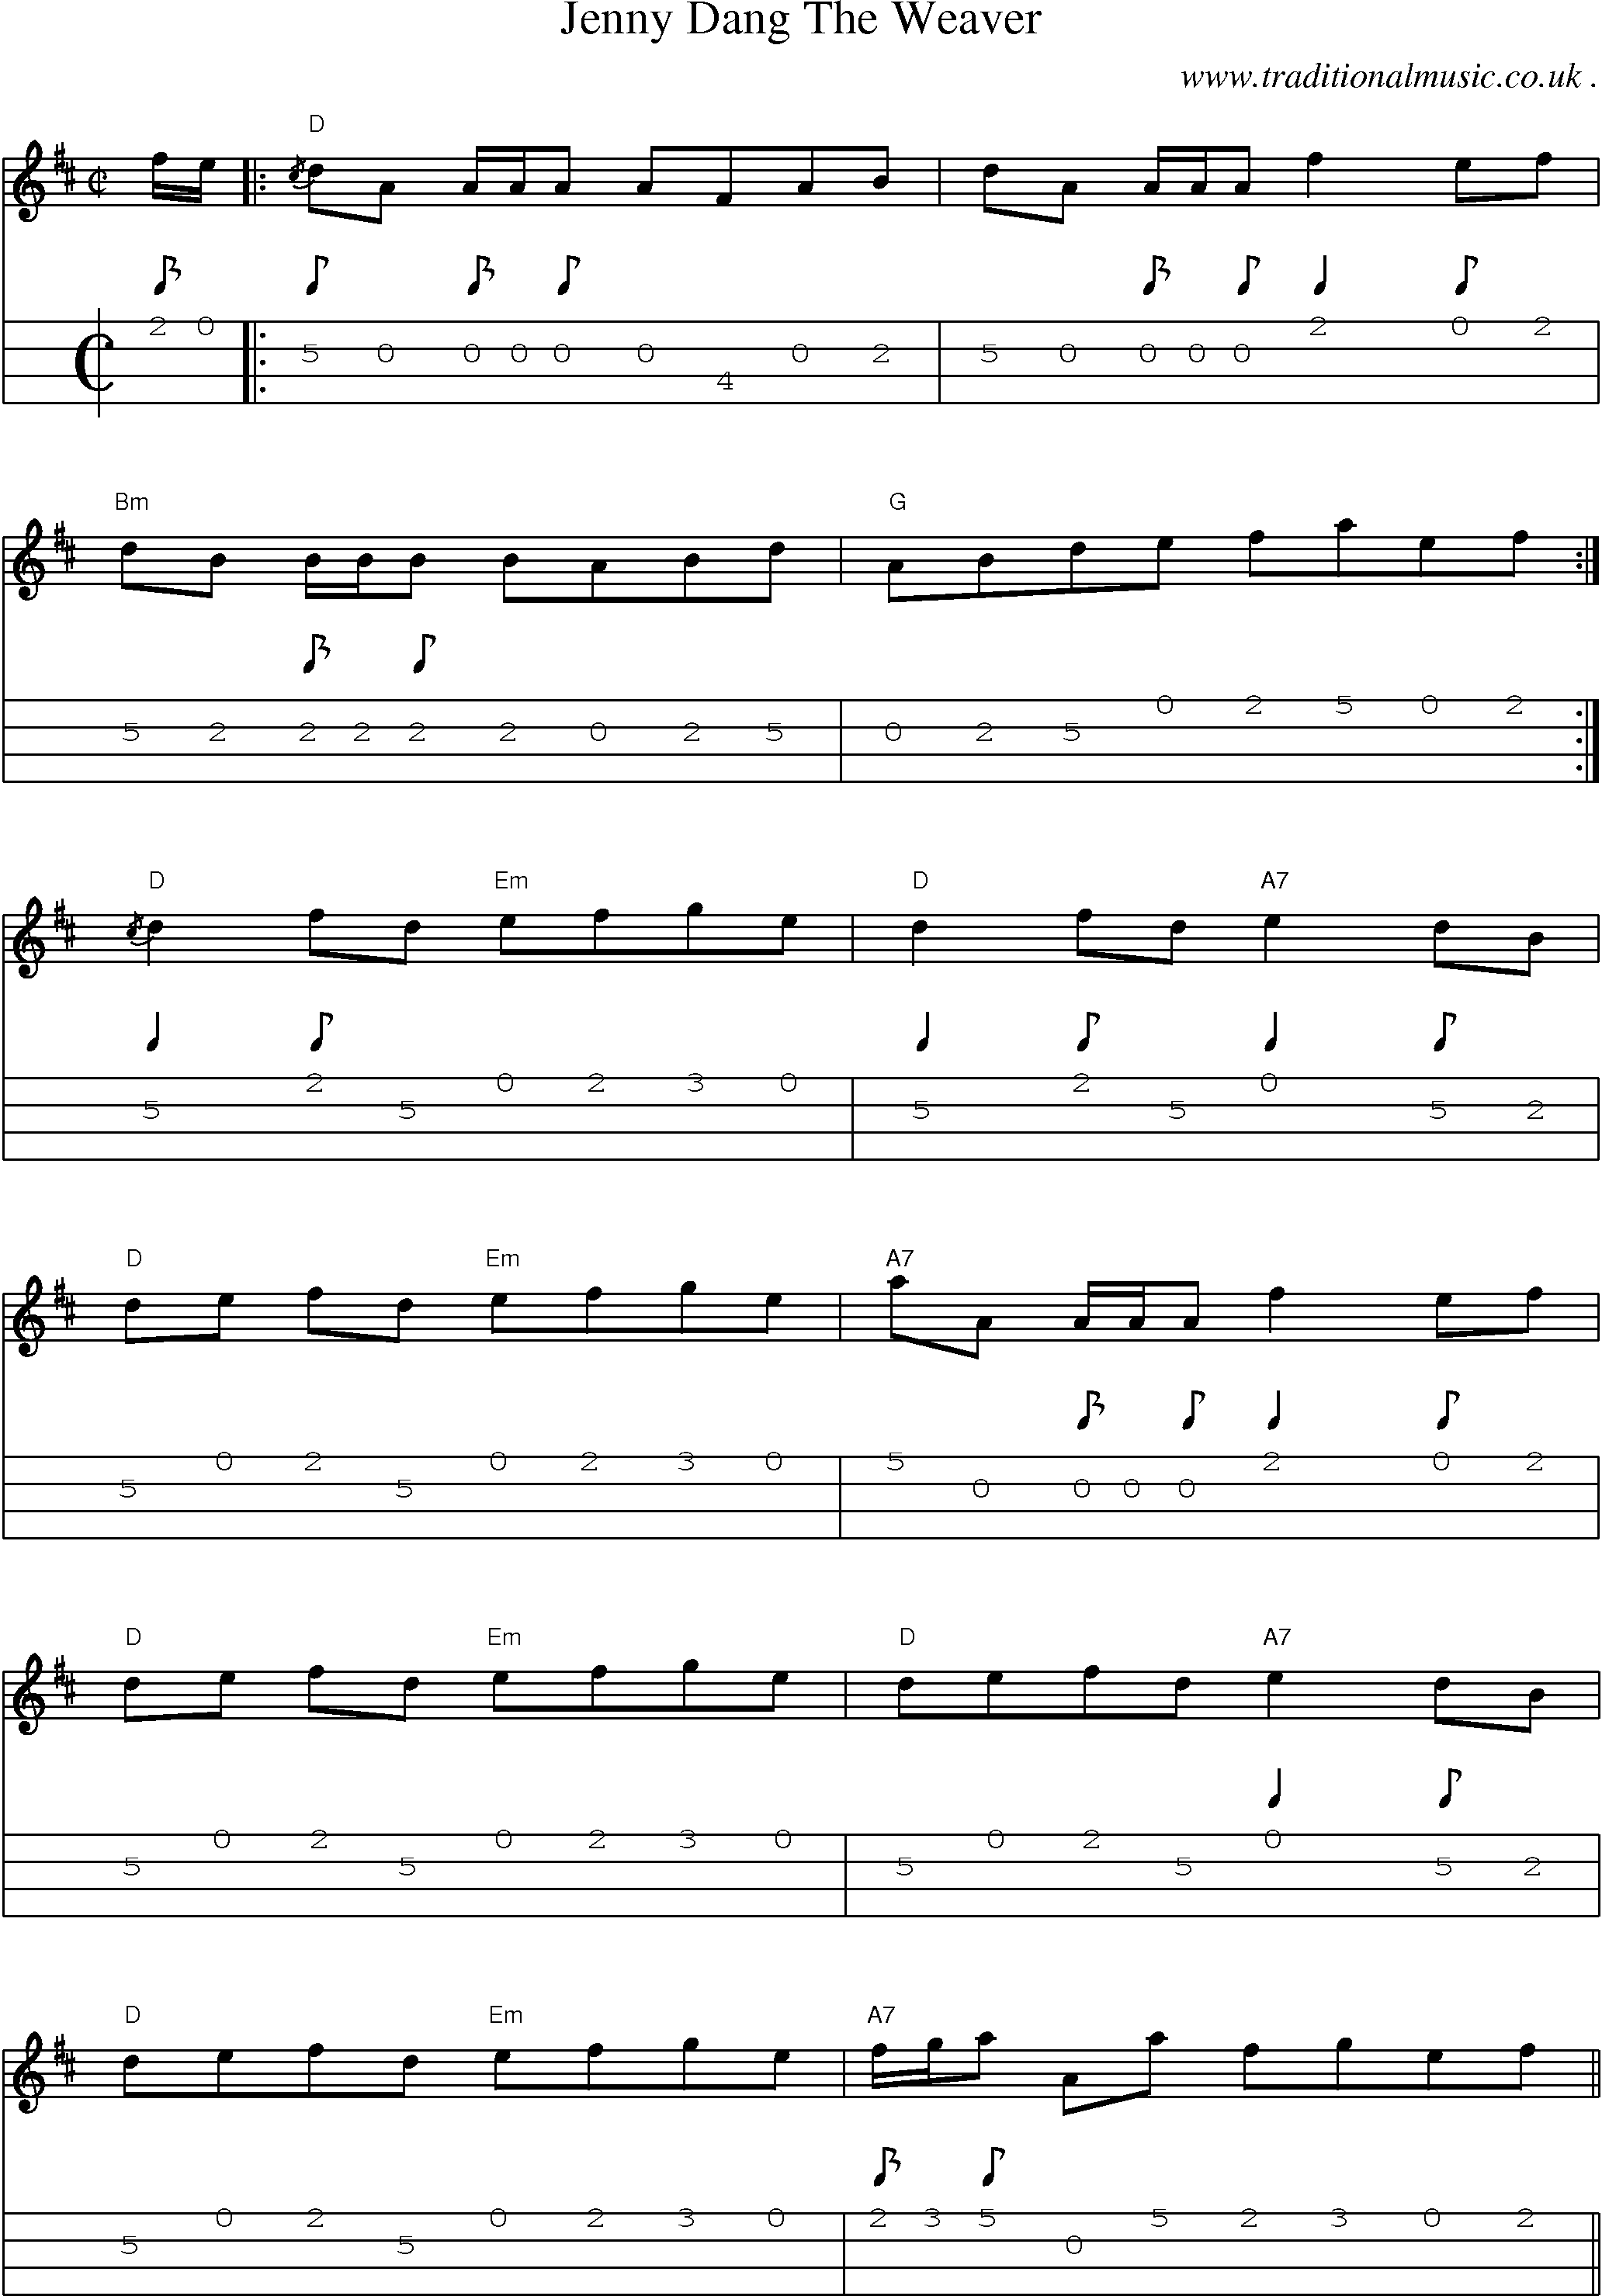 Music Score and Guitar Tabs for Jenny Dang The Weaver